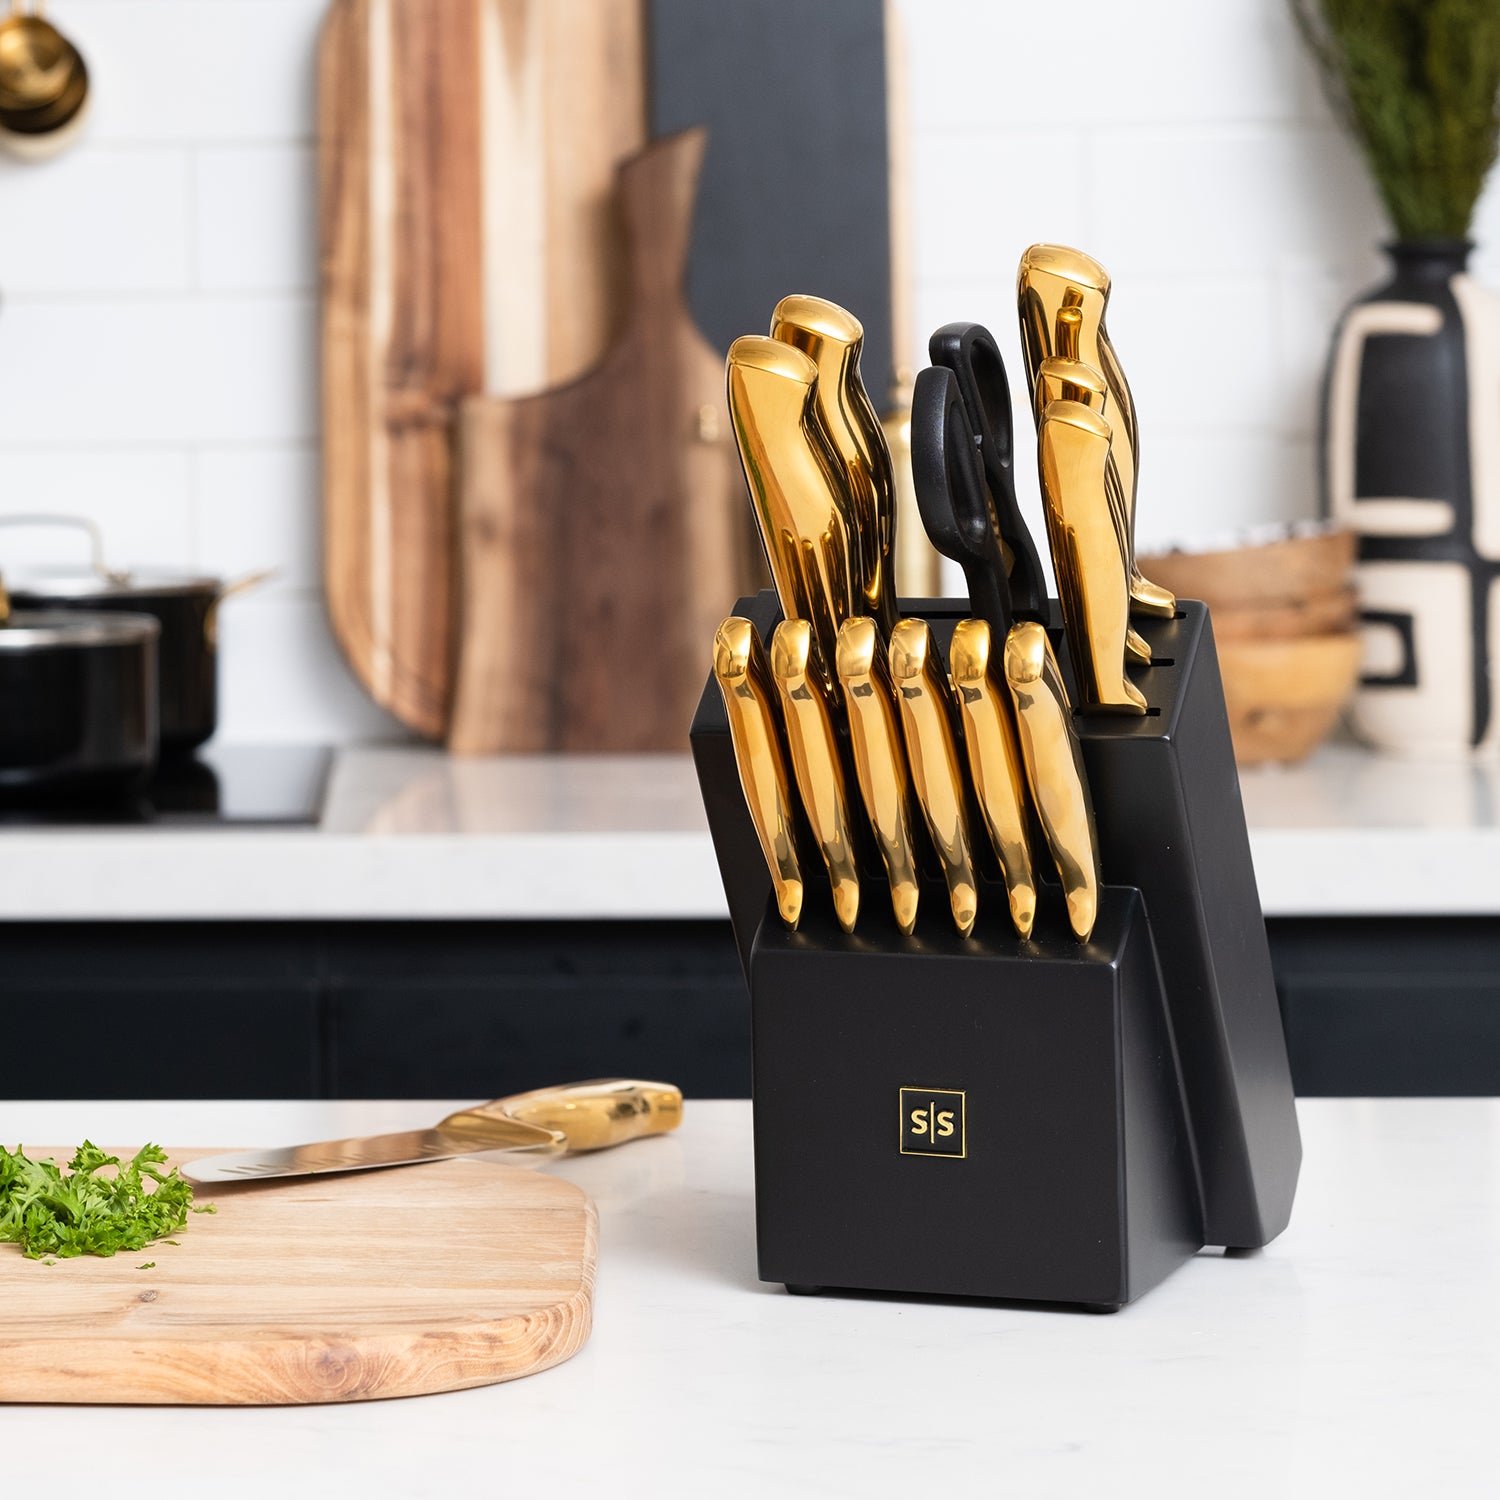 Gold Knife Set with Black Self-Sharpening Block - Styled Settings